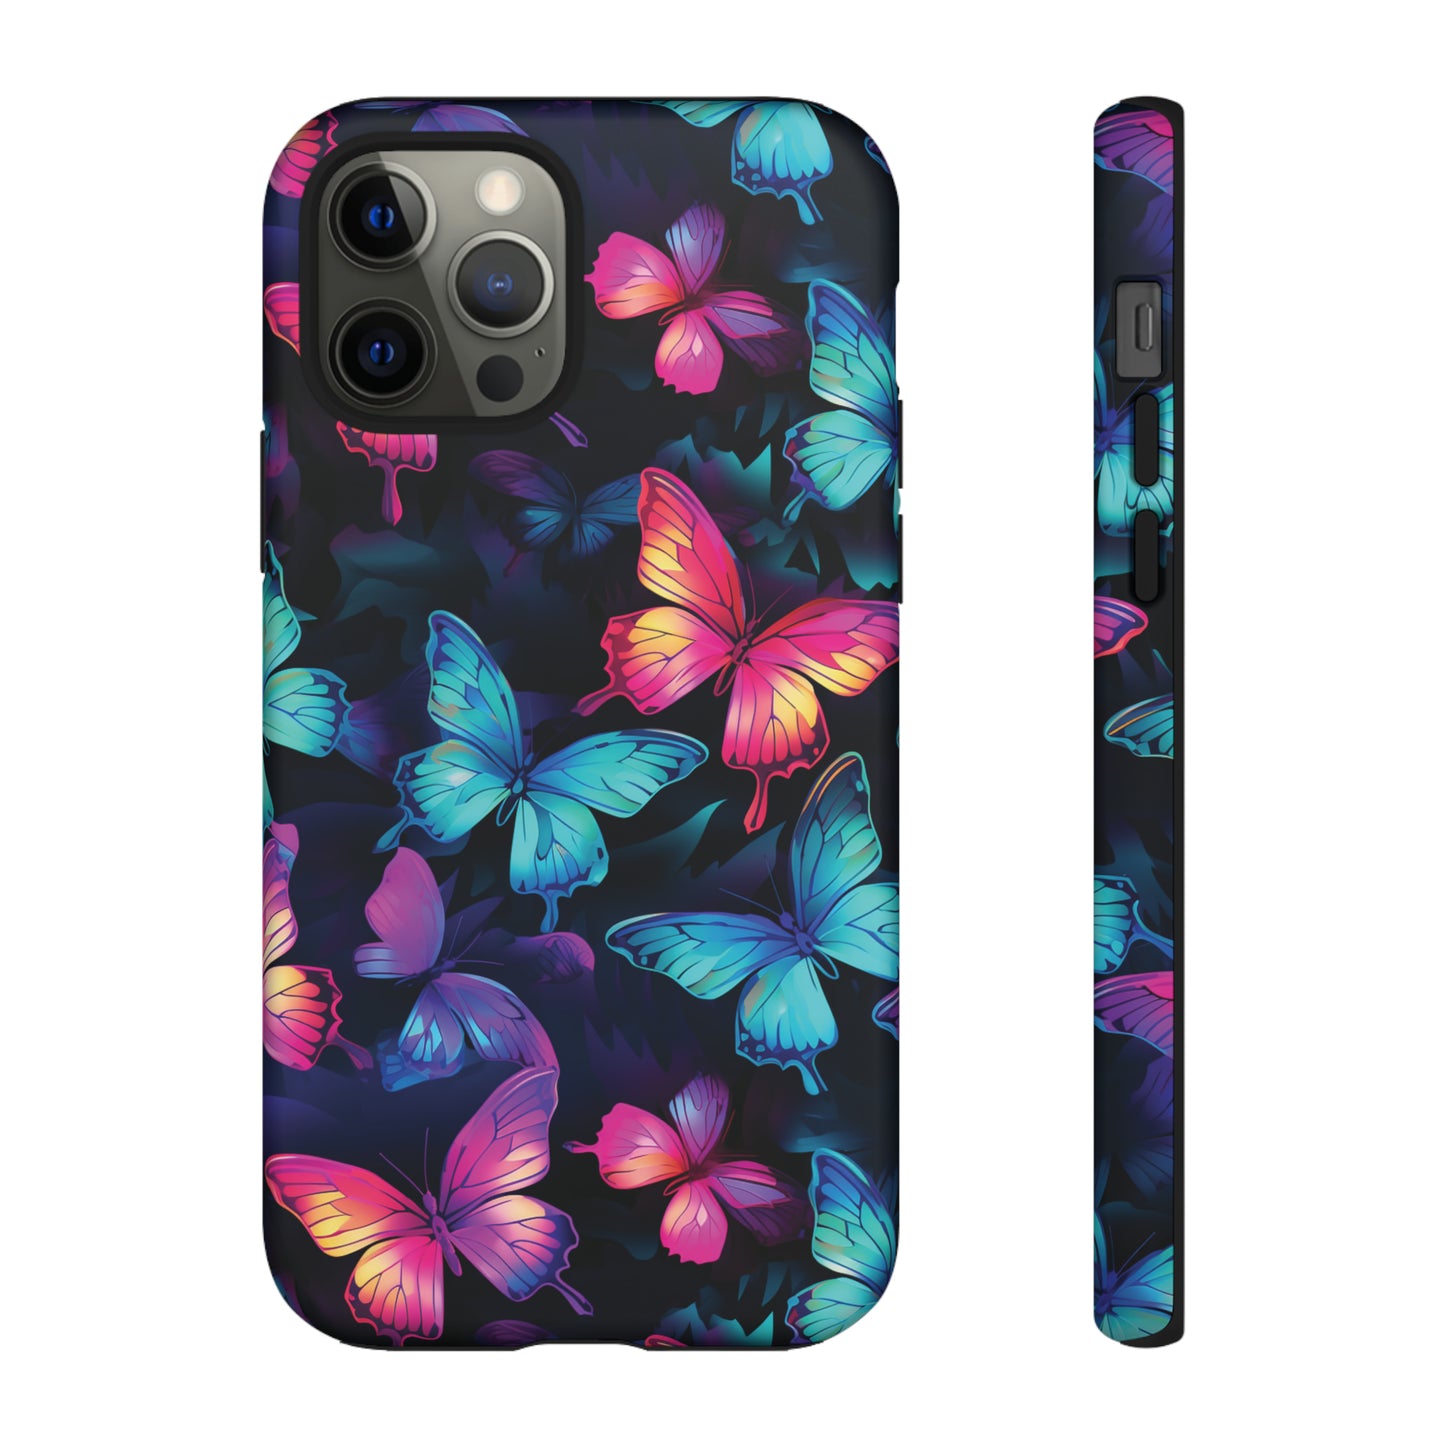 Neon Butterfly Phone Case for iPhone, Samsung Galaxy, Google Pixel